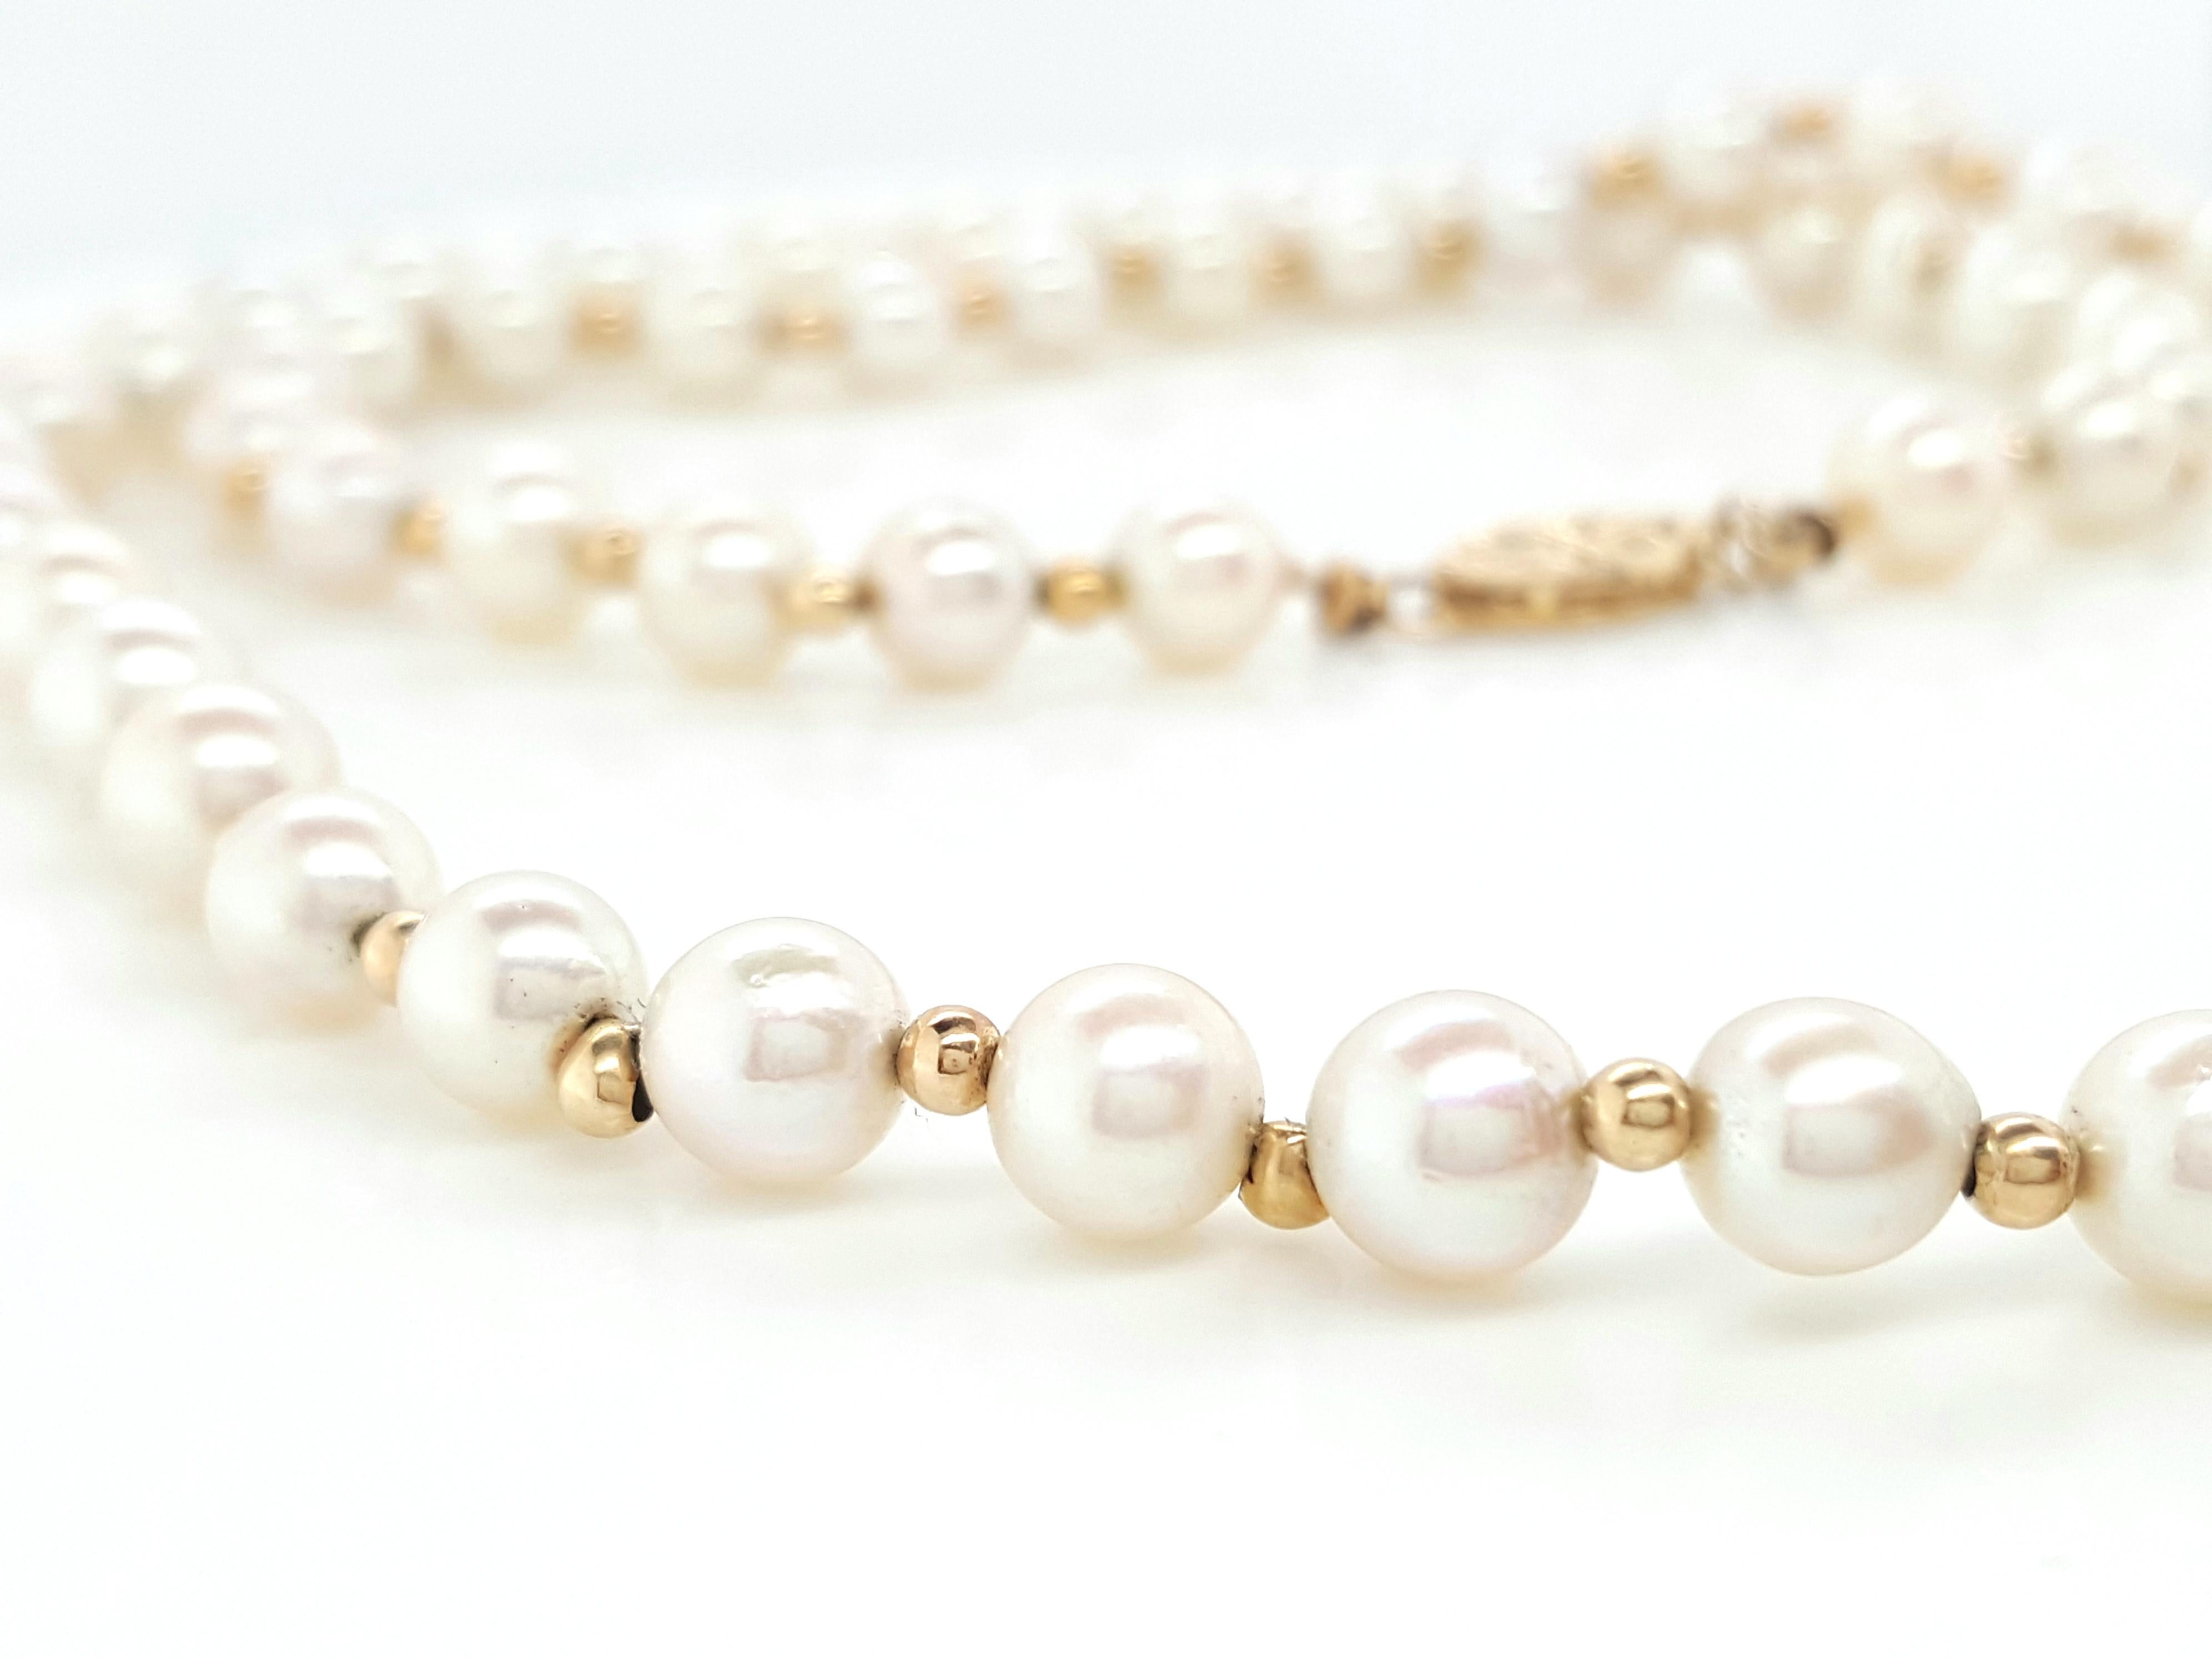 Akoya Pearl Strand Accented by 14K Yellow Gold Beads   This necklace is made of sixty pearls measuring from 5.46 - 5.88 mm alternating with 14 karat yellow gold beads and finished with a 14 karat yellow gold marquise shaped pearl clasp.  The strand